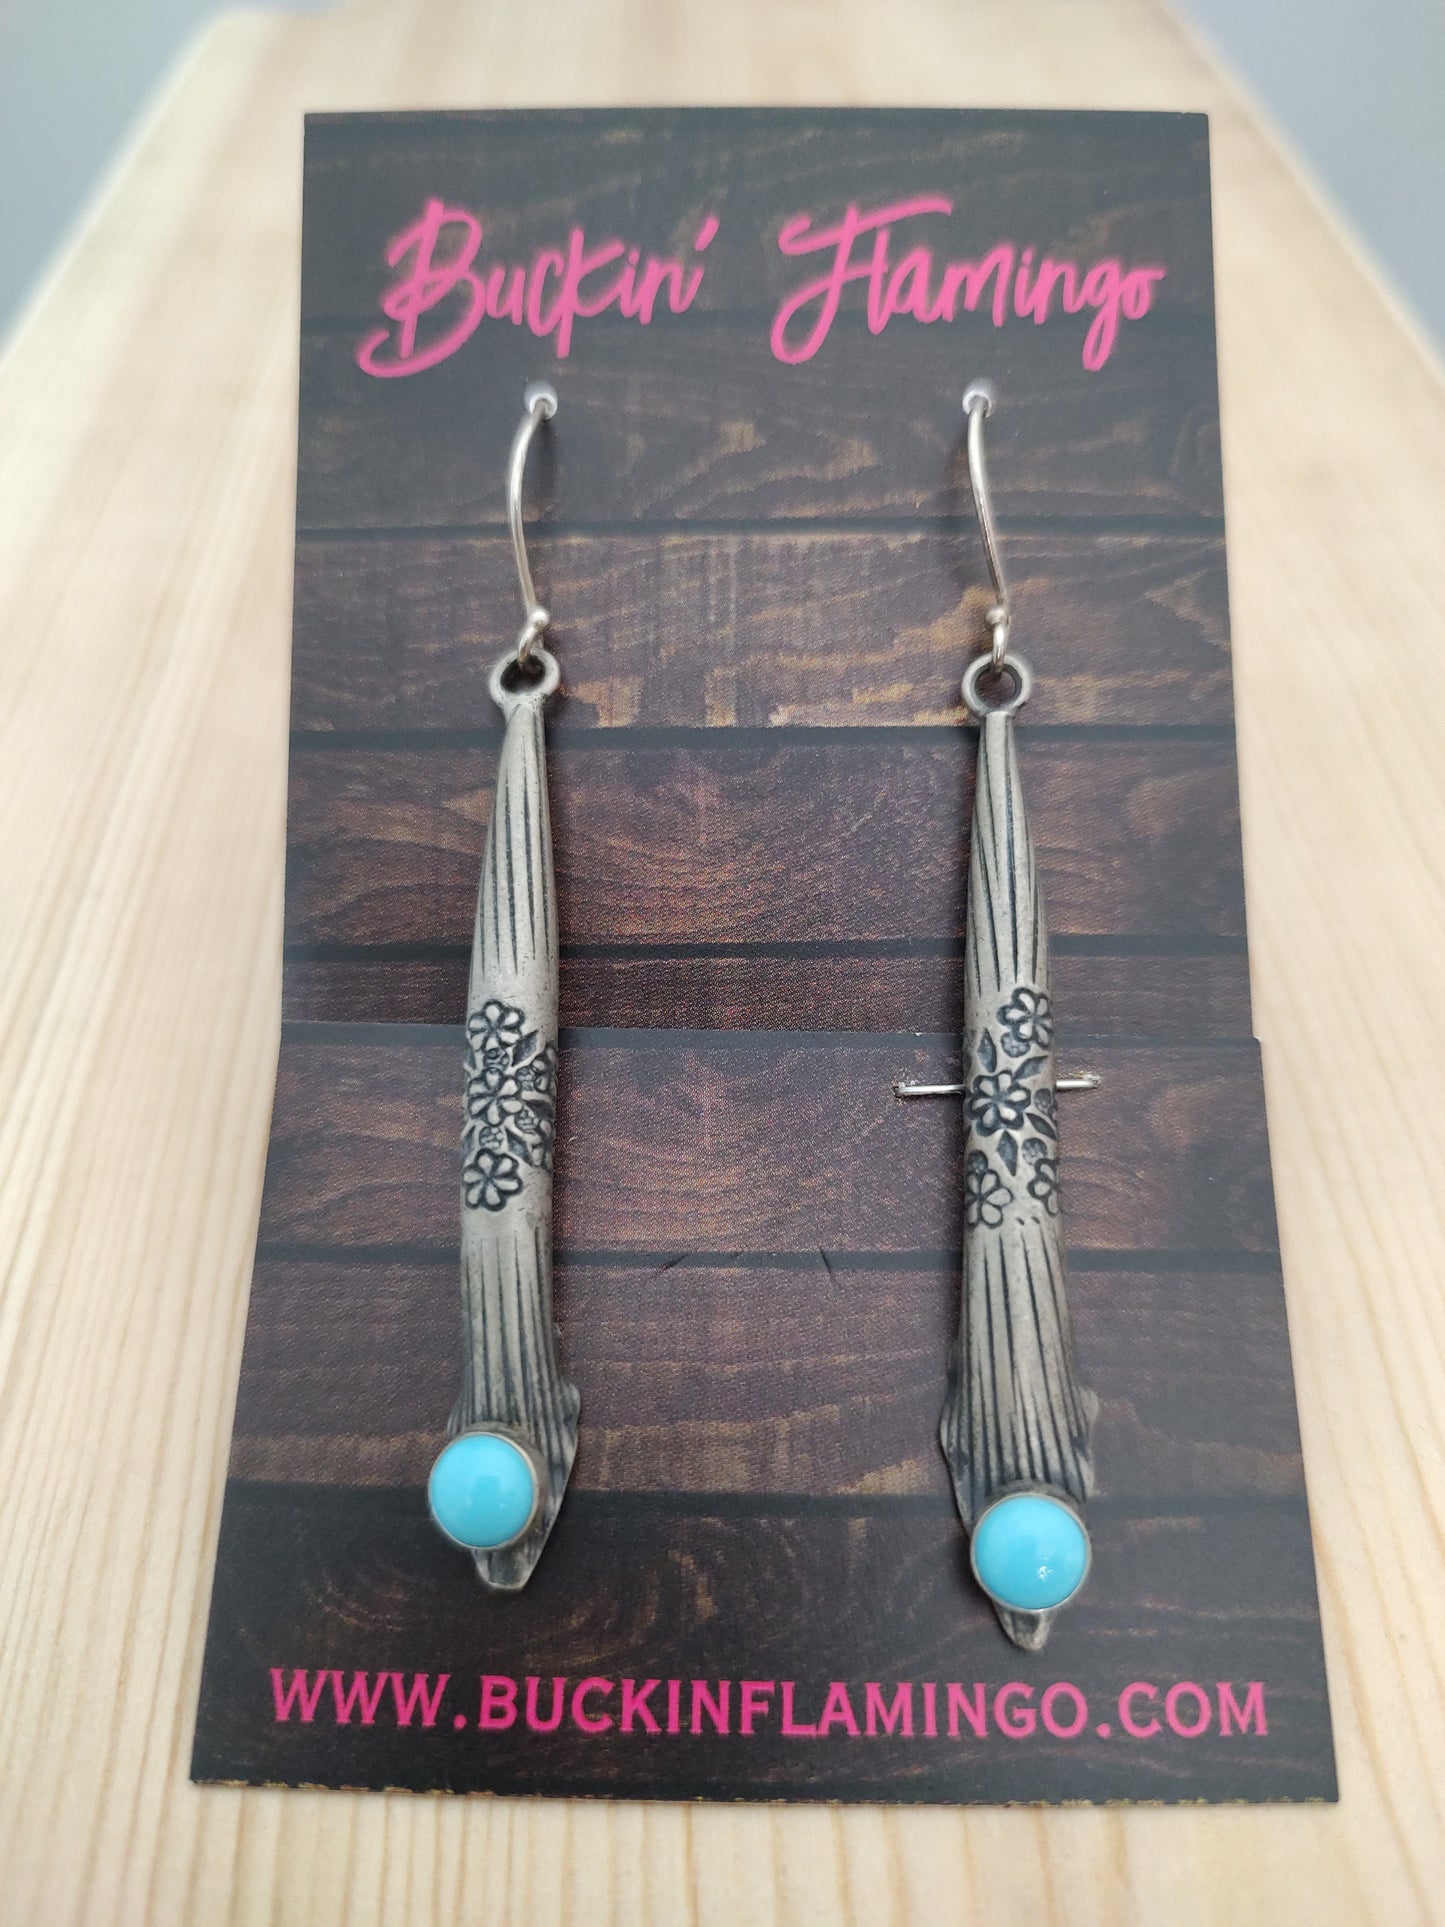 Sleeping Beauty Turquoise on the Folded Stamped Silver with Hook Earrings